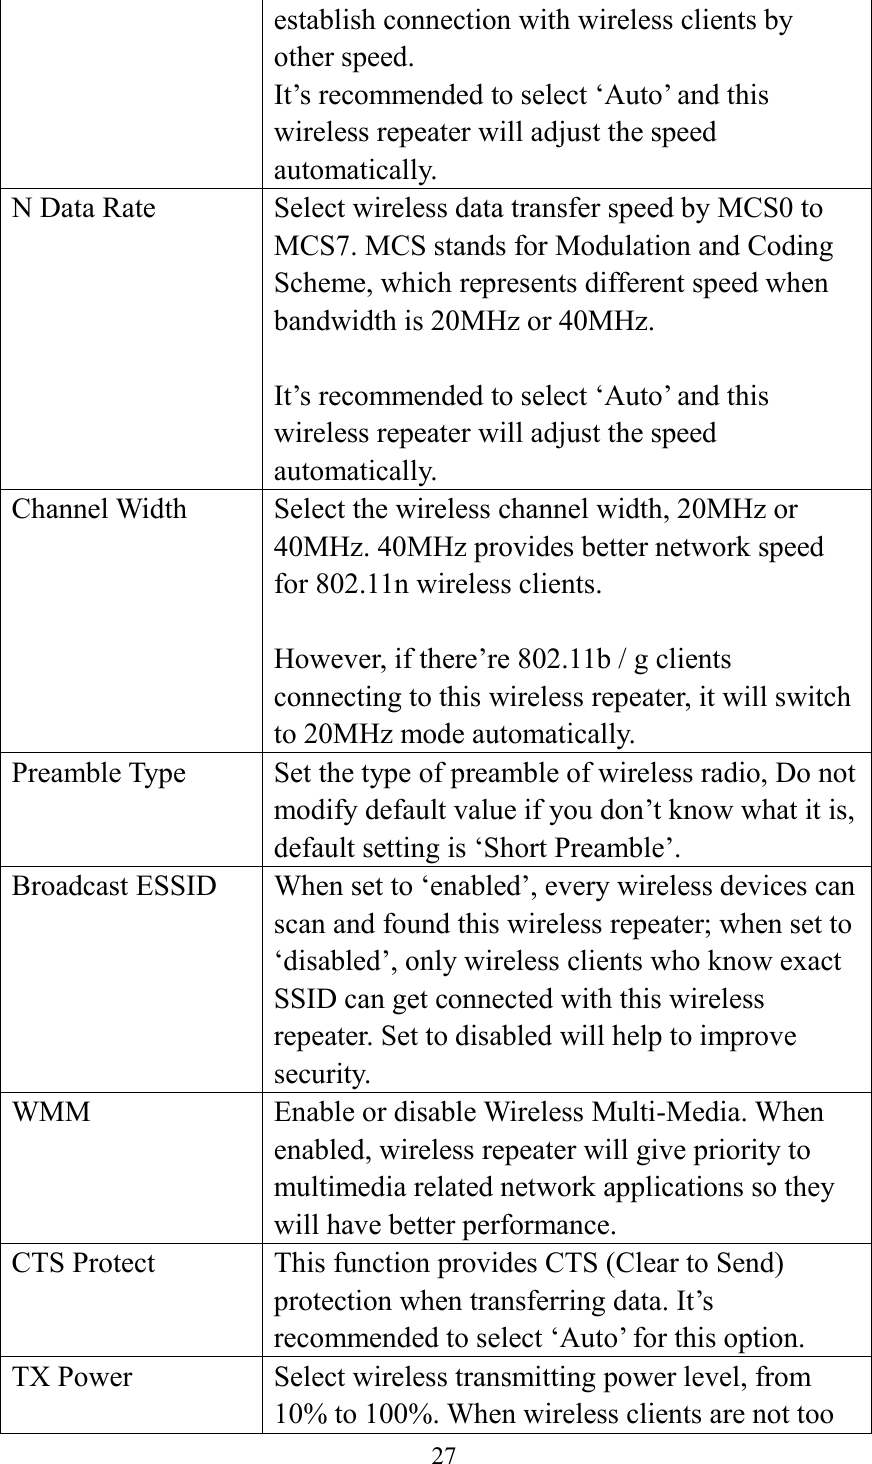  27  establish connection with wireless clients by other speed. It’s recommended to select ‘Auto’ and this wireless repeater will adjust the speed automatically. N Data Rate Select wireless data transfer speed by MCS0 to MCS7. MCS stands for Modulation and Coding Scheme, which represents different speed when bandwidth is 20MHz or 40MHz.  It’s recommended to select ‘Auto’ and this wireless repeater will adjust the speed automatically. Channel Width Select the wireless channel width, 20MHz or 40MHz. 40MHz provides better network speed for 802.11n wireless clients.    However, if there’re 802.11b / g clients connecting to this wireless repeater, it will switch to 20MHz mode automatically. Preamble Type Set the type of preamble of wireless radio, Do not modify default value if you don’t know what it is, default setting is ‘Short Preamble’. Broadcast ESSID When set to ‘enabled’, every wireless devices can scan and found this wireless repeater; when set to ‘disabled’, only wireless clients who know exact SSID can get connected with this wireless repeater. Set to disabled will help to improve security. WMM Enable or disable Wireless Multi-Media. When enabled, wireless repeater will give priority to multimedia related network applications so they will have better performance. CTS Protect This function provides CTS (Clear to Send) protection when transferring data. It’s recommended to select ‘Auto’ for this option. TX Power Select wireless transmitting power level, from 10% to 100%. When wireless clients are not too 